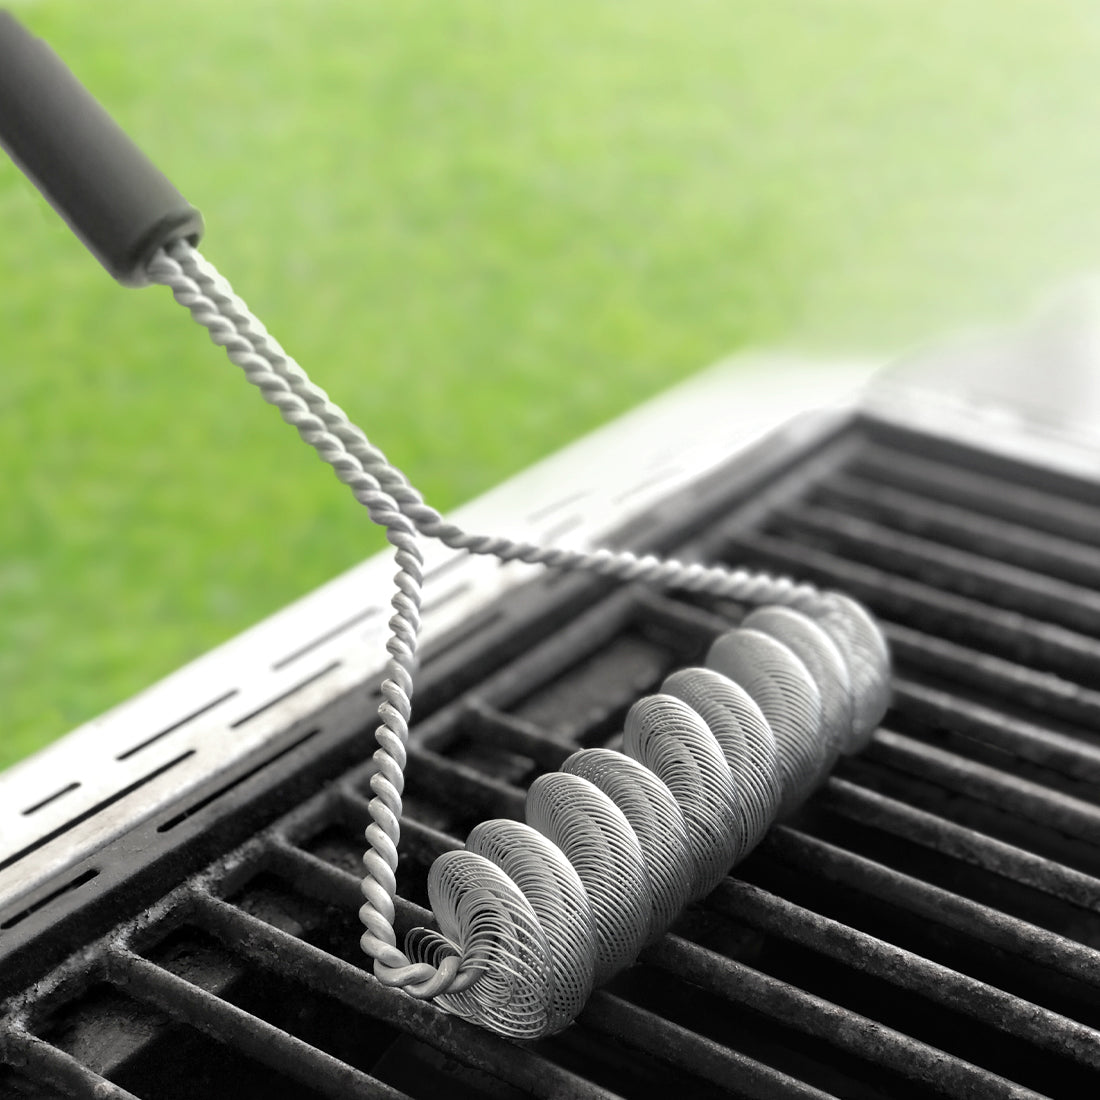 BBQ Grill Brush Scraper Cleaning Tool Stainless Steel